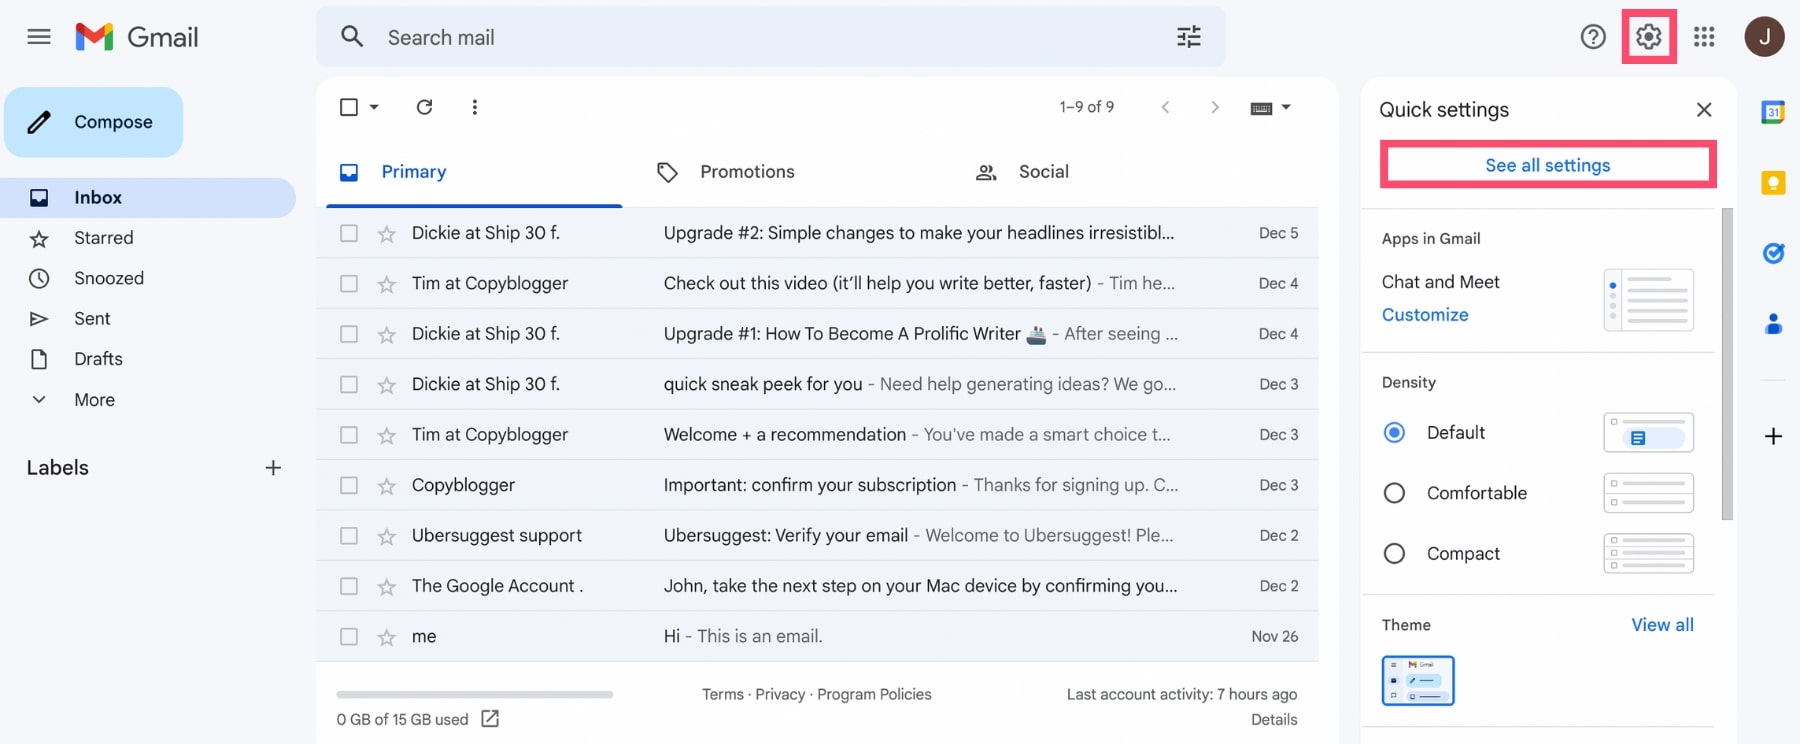 The settings of your Gmail account